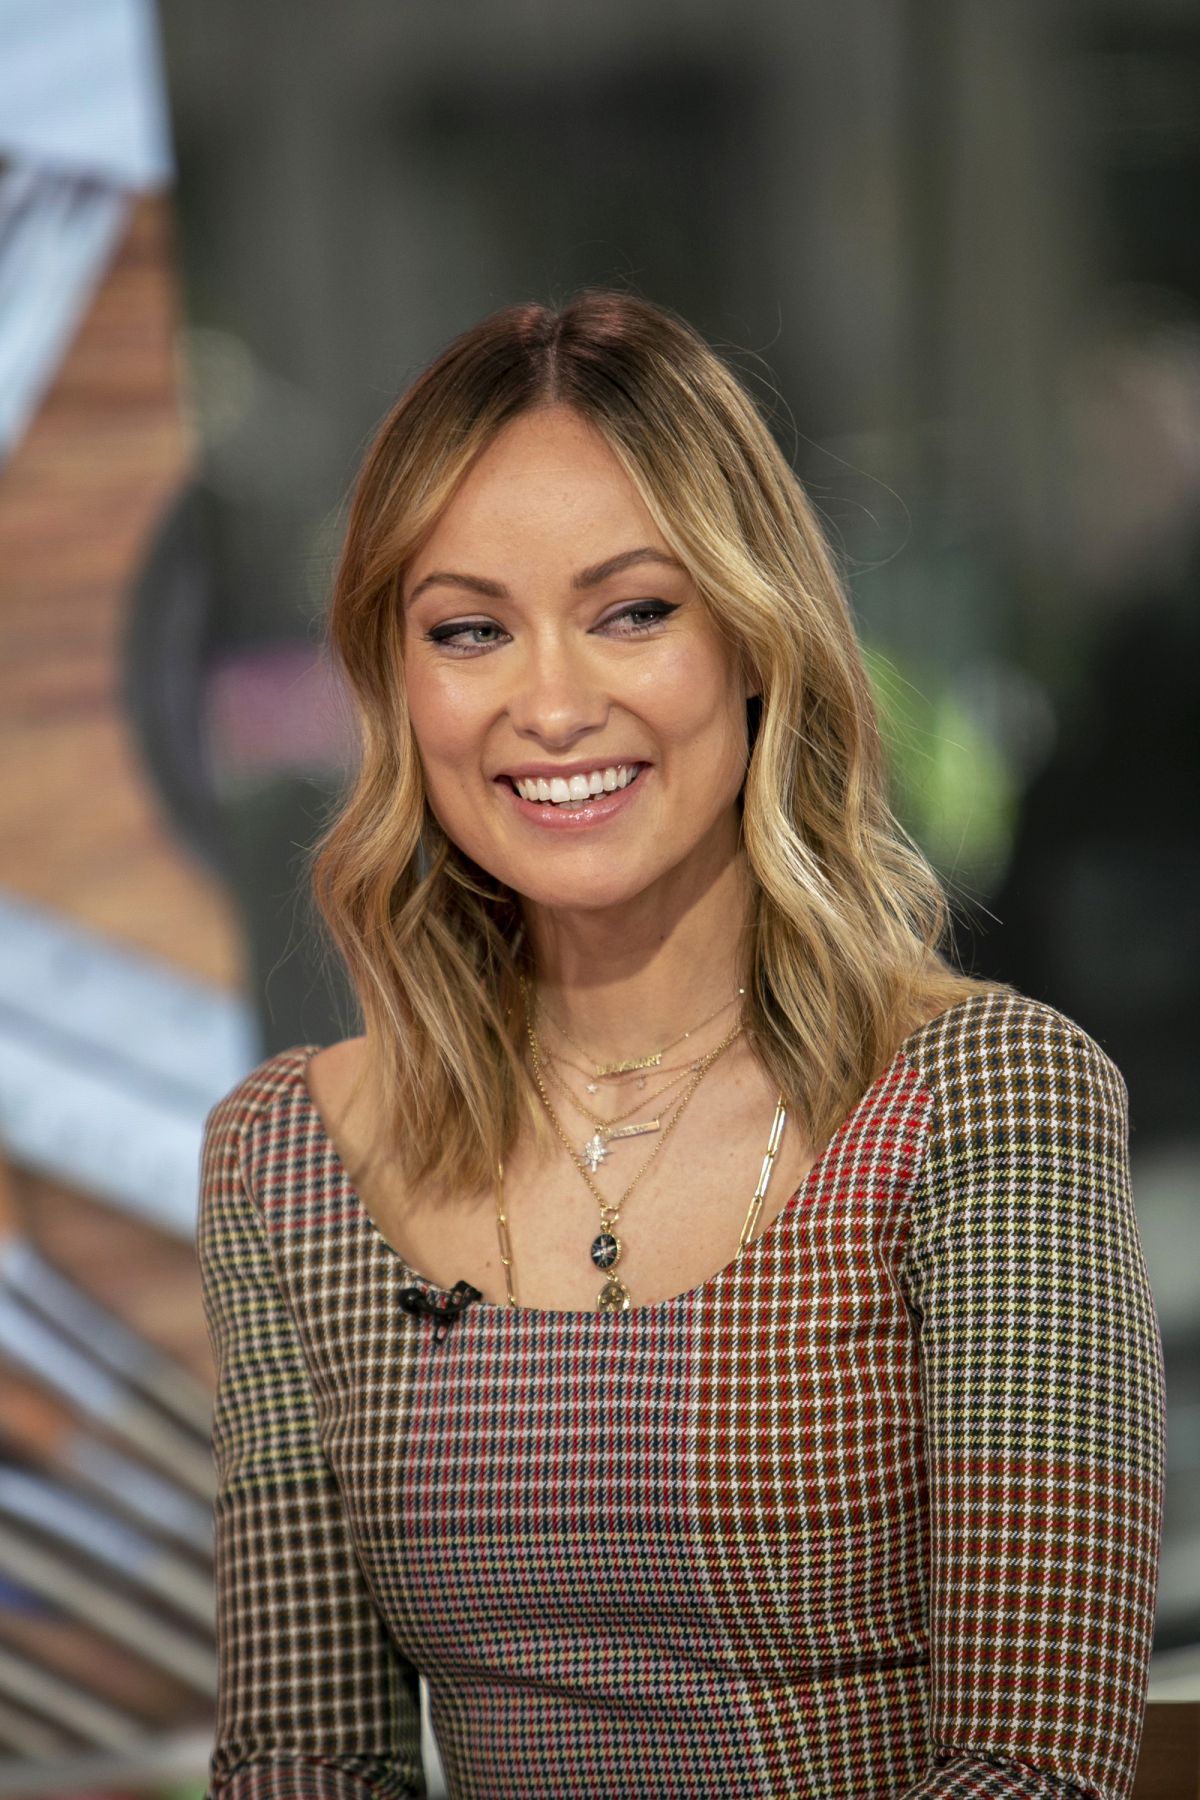 OLIVIA WILDE at Today Show in New York 05/15/2019 – HawtCelebs